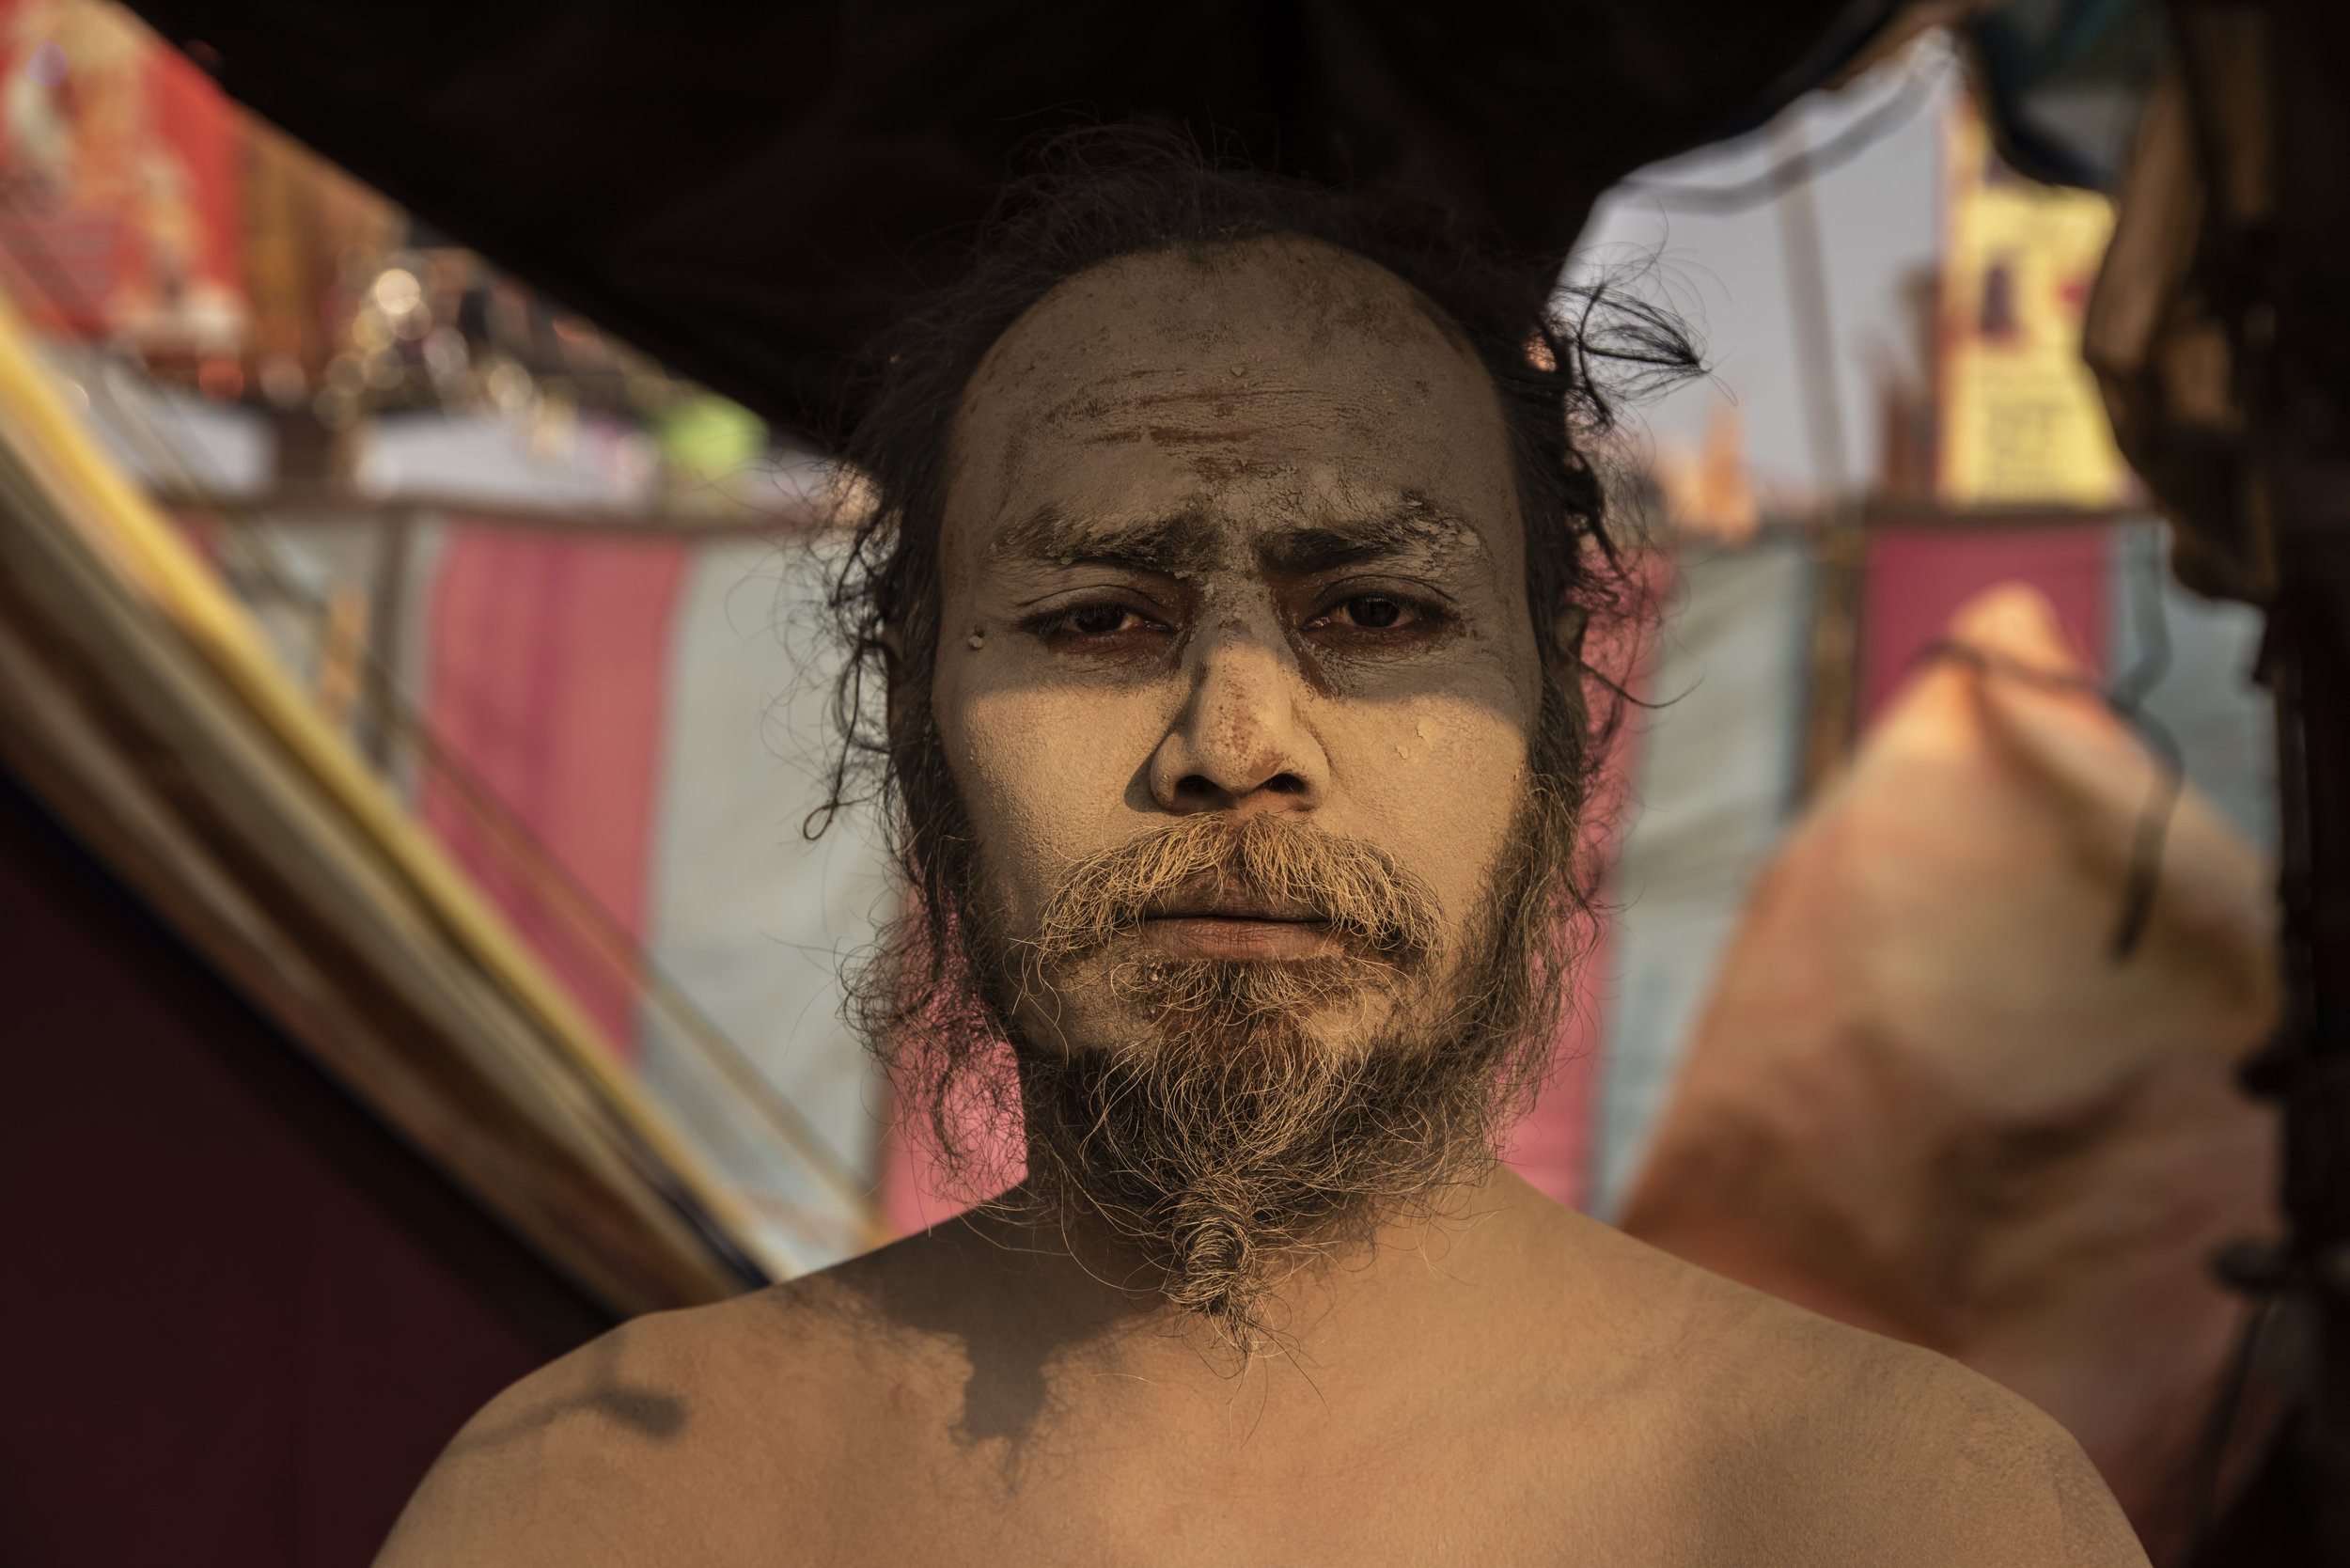  A Naga Sadhu meditates in his tent, offering blessings to those who pass. 